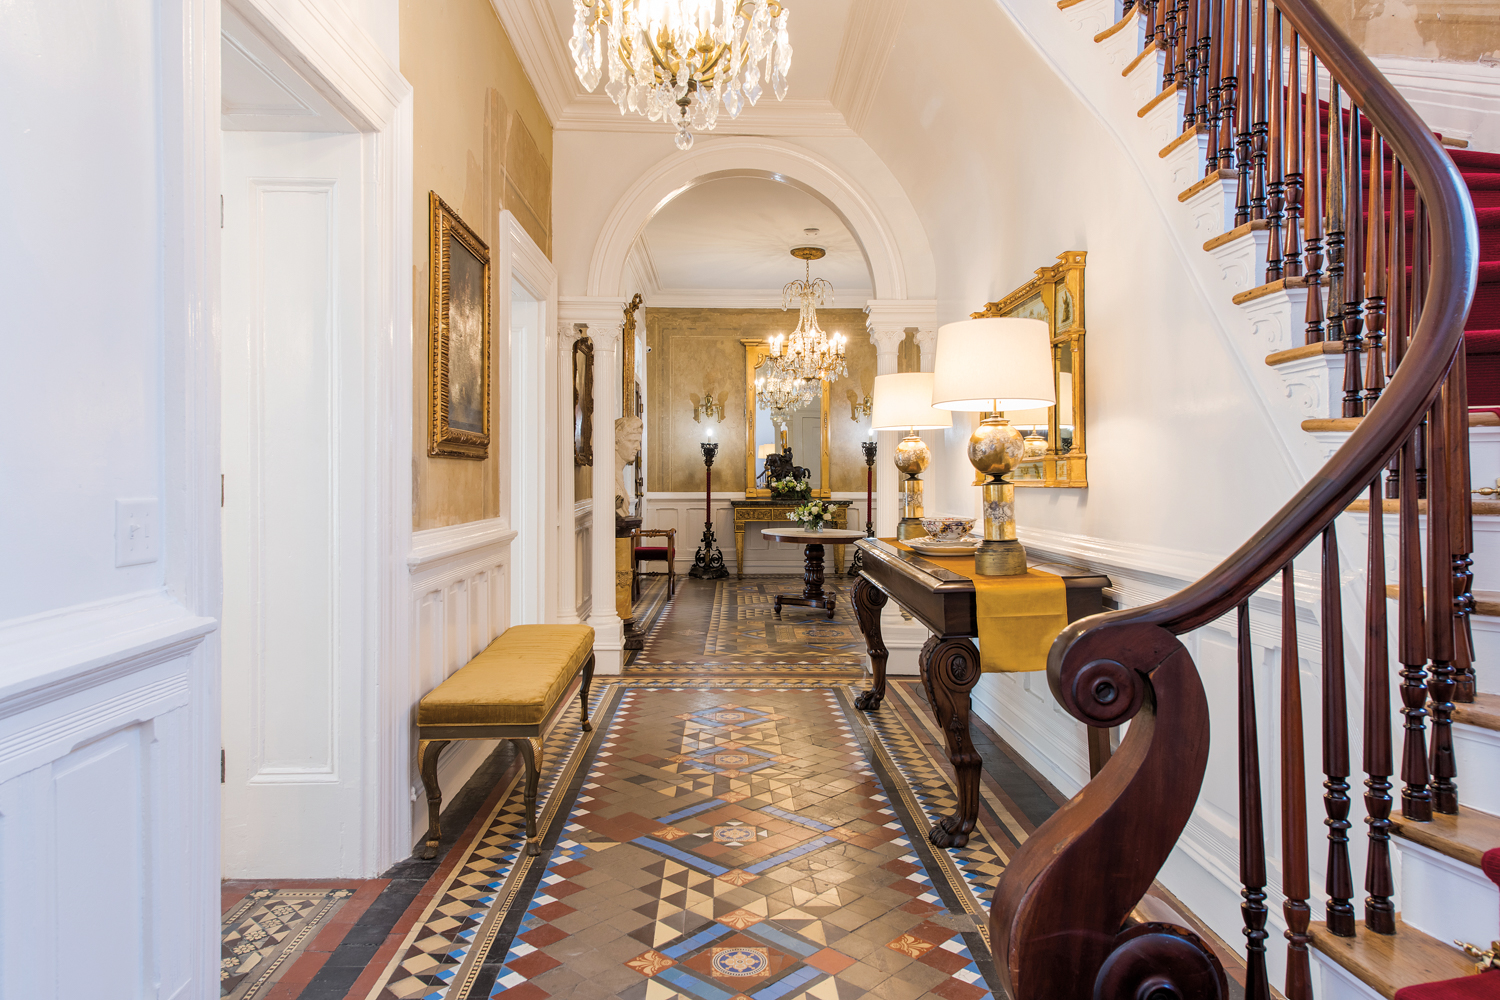 Entryway with crystal chandeliers and tiled floors; on the right, a wooden staircase leads up with a red stair runner 